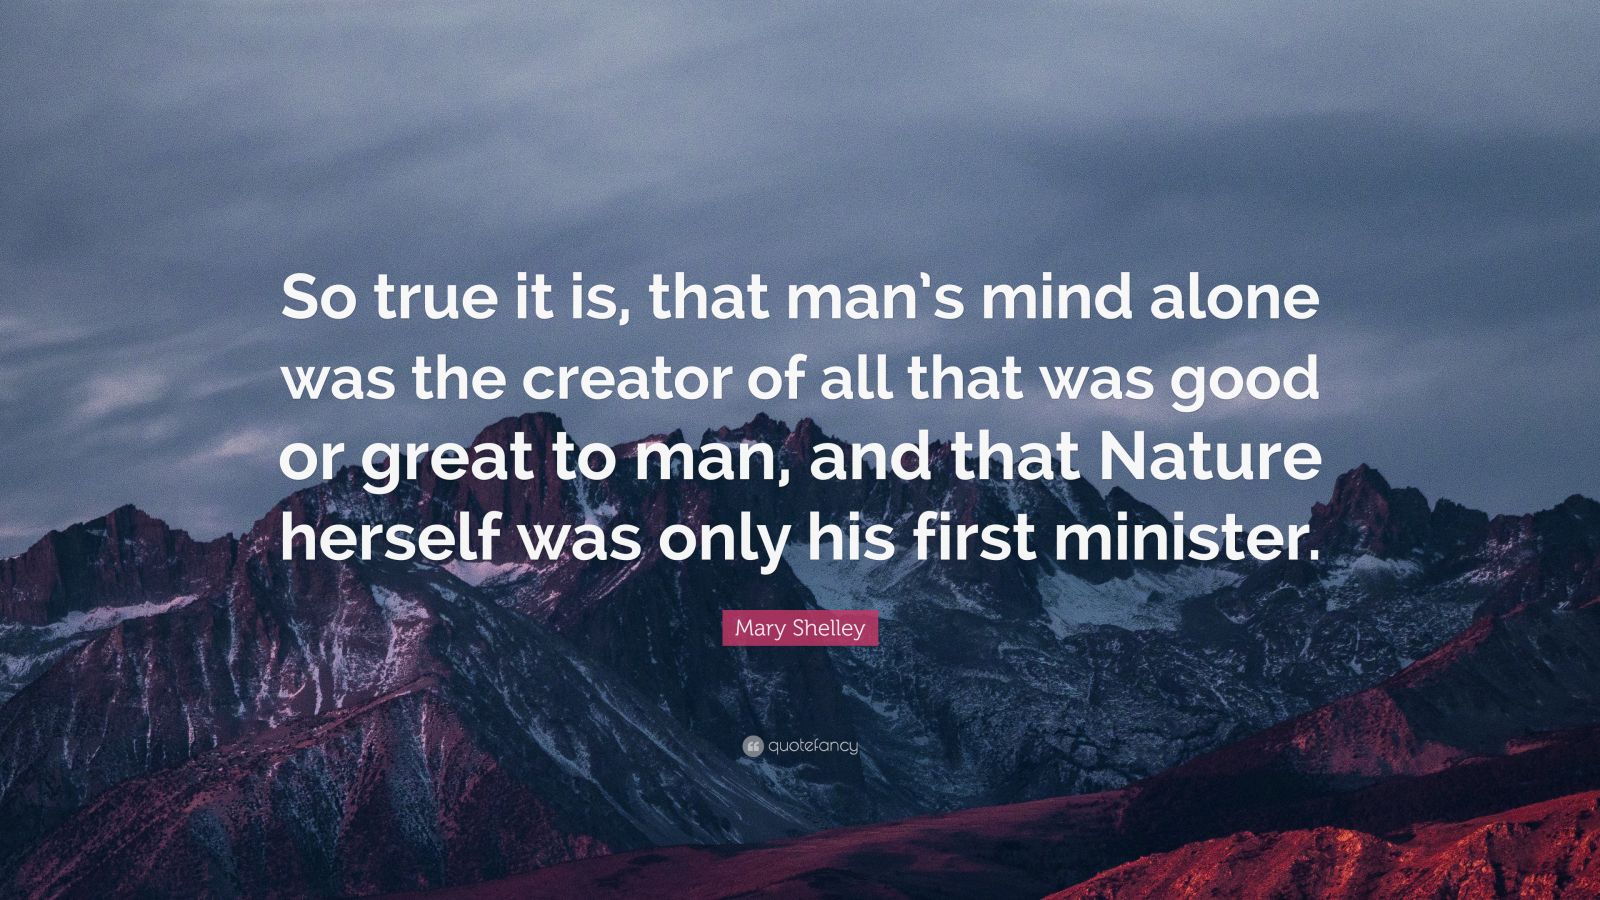 Mary Shelley Quote: “So true it is, that man’s mind alone was the ...